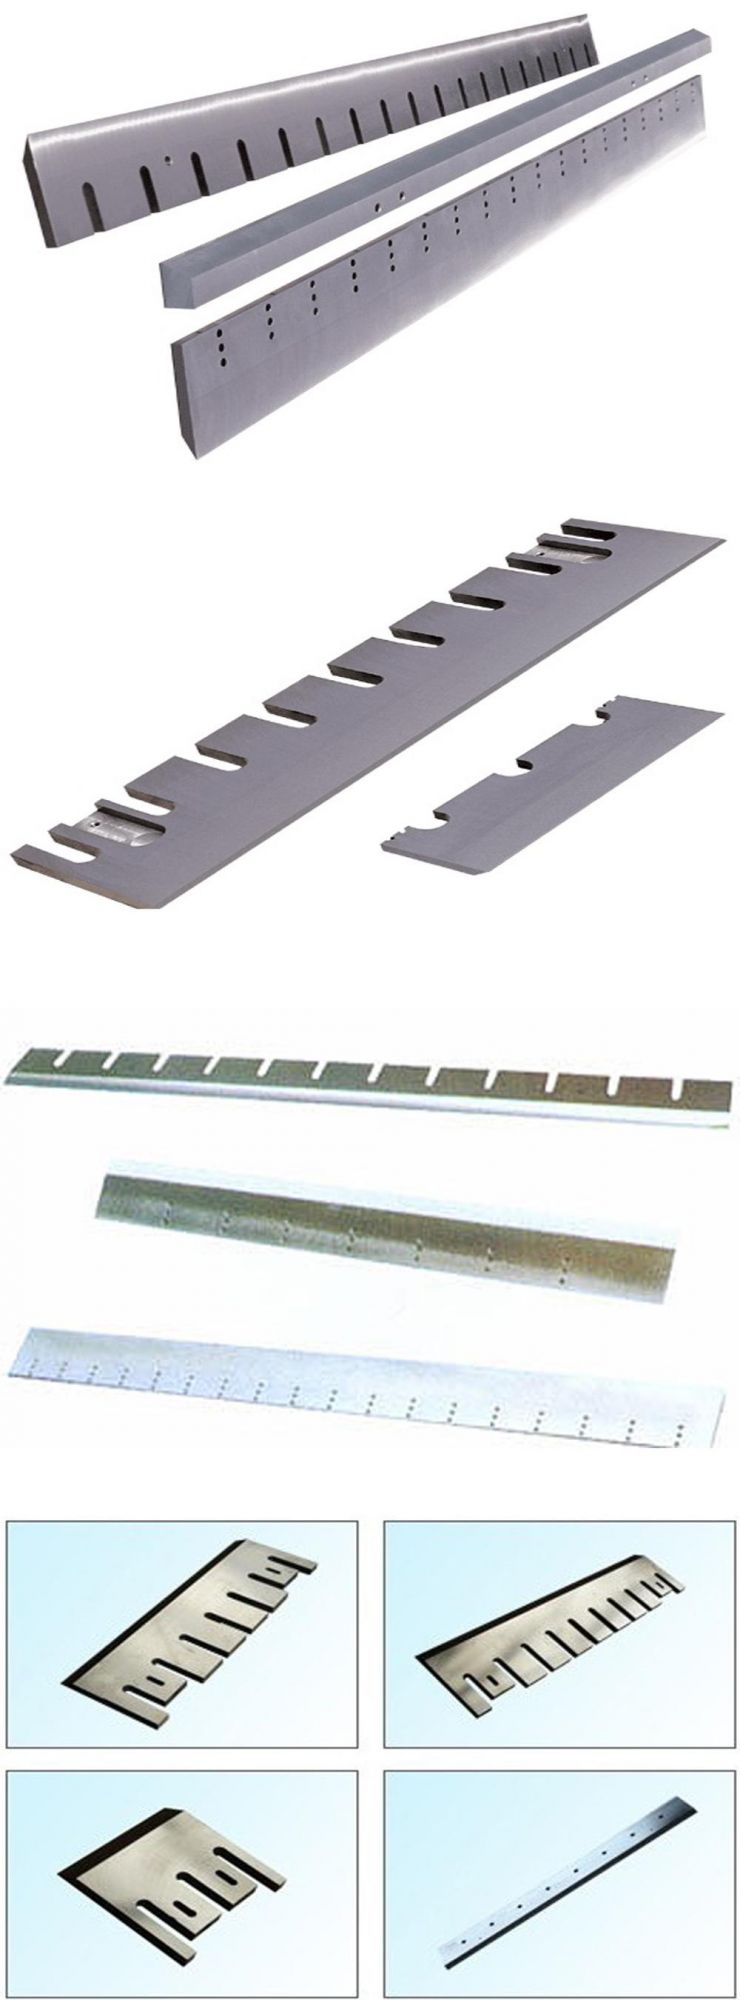 China Supplier Diamond Saw Blade for Wood Cutting